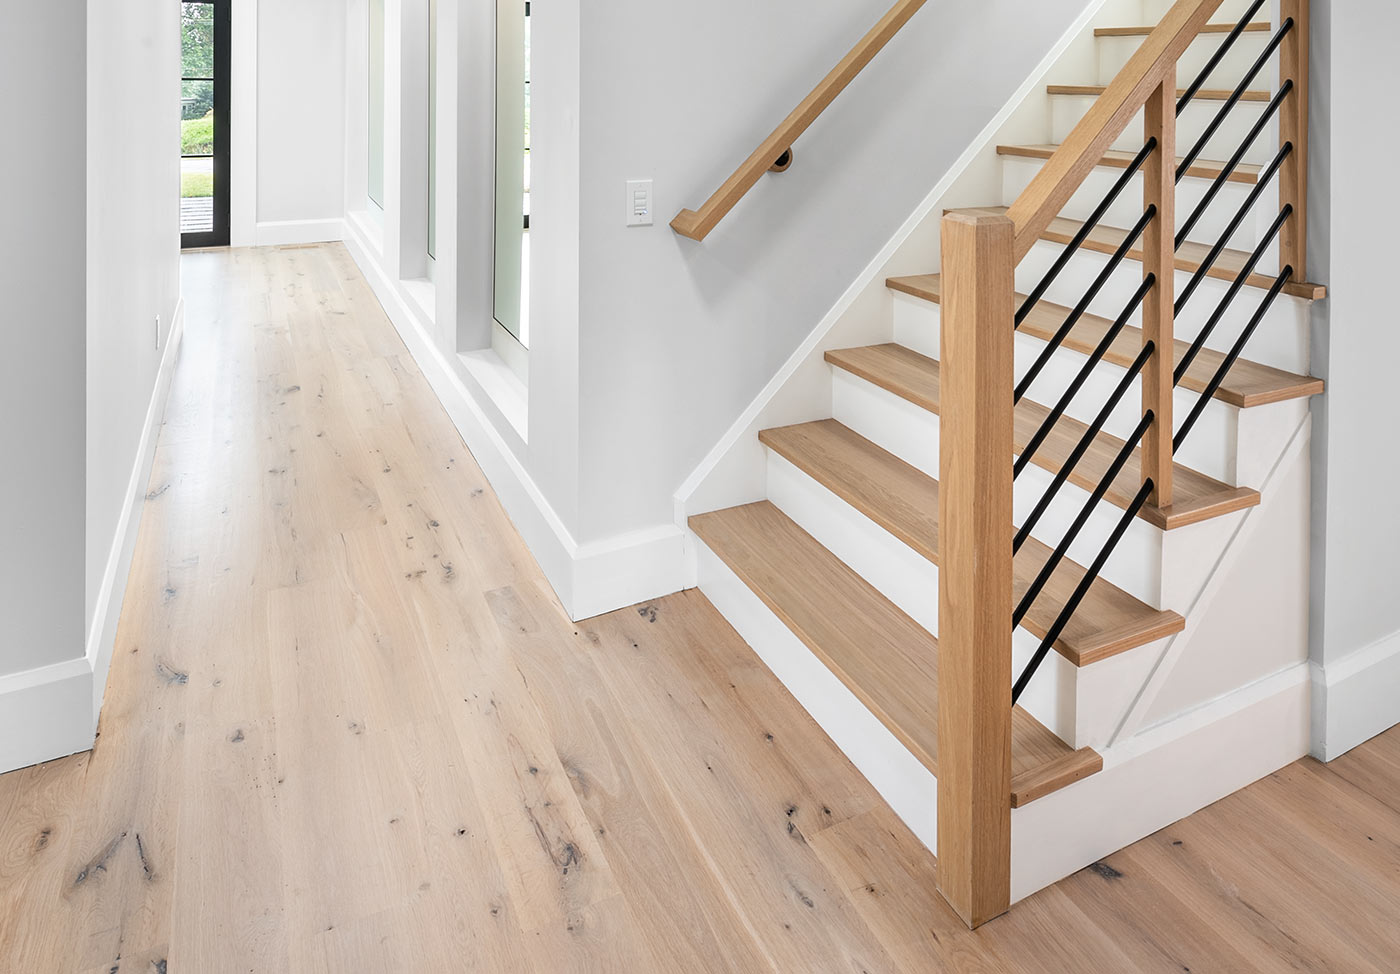 Fine hardwood floors and stair parts for an elegant look.